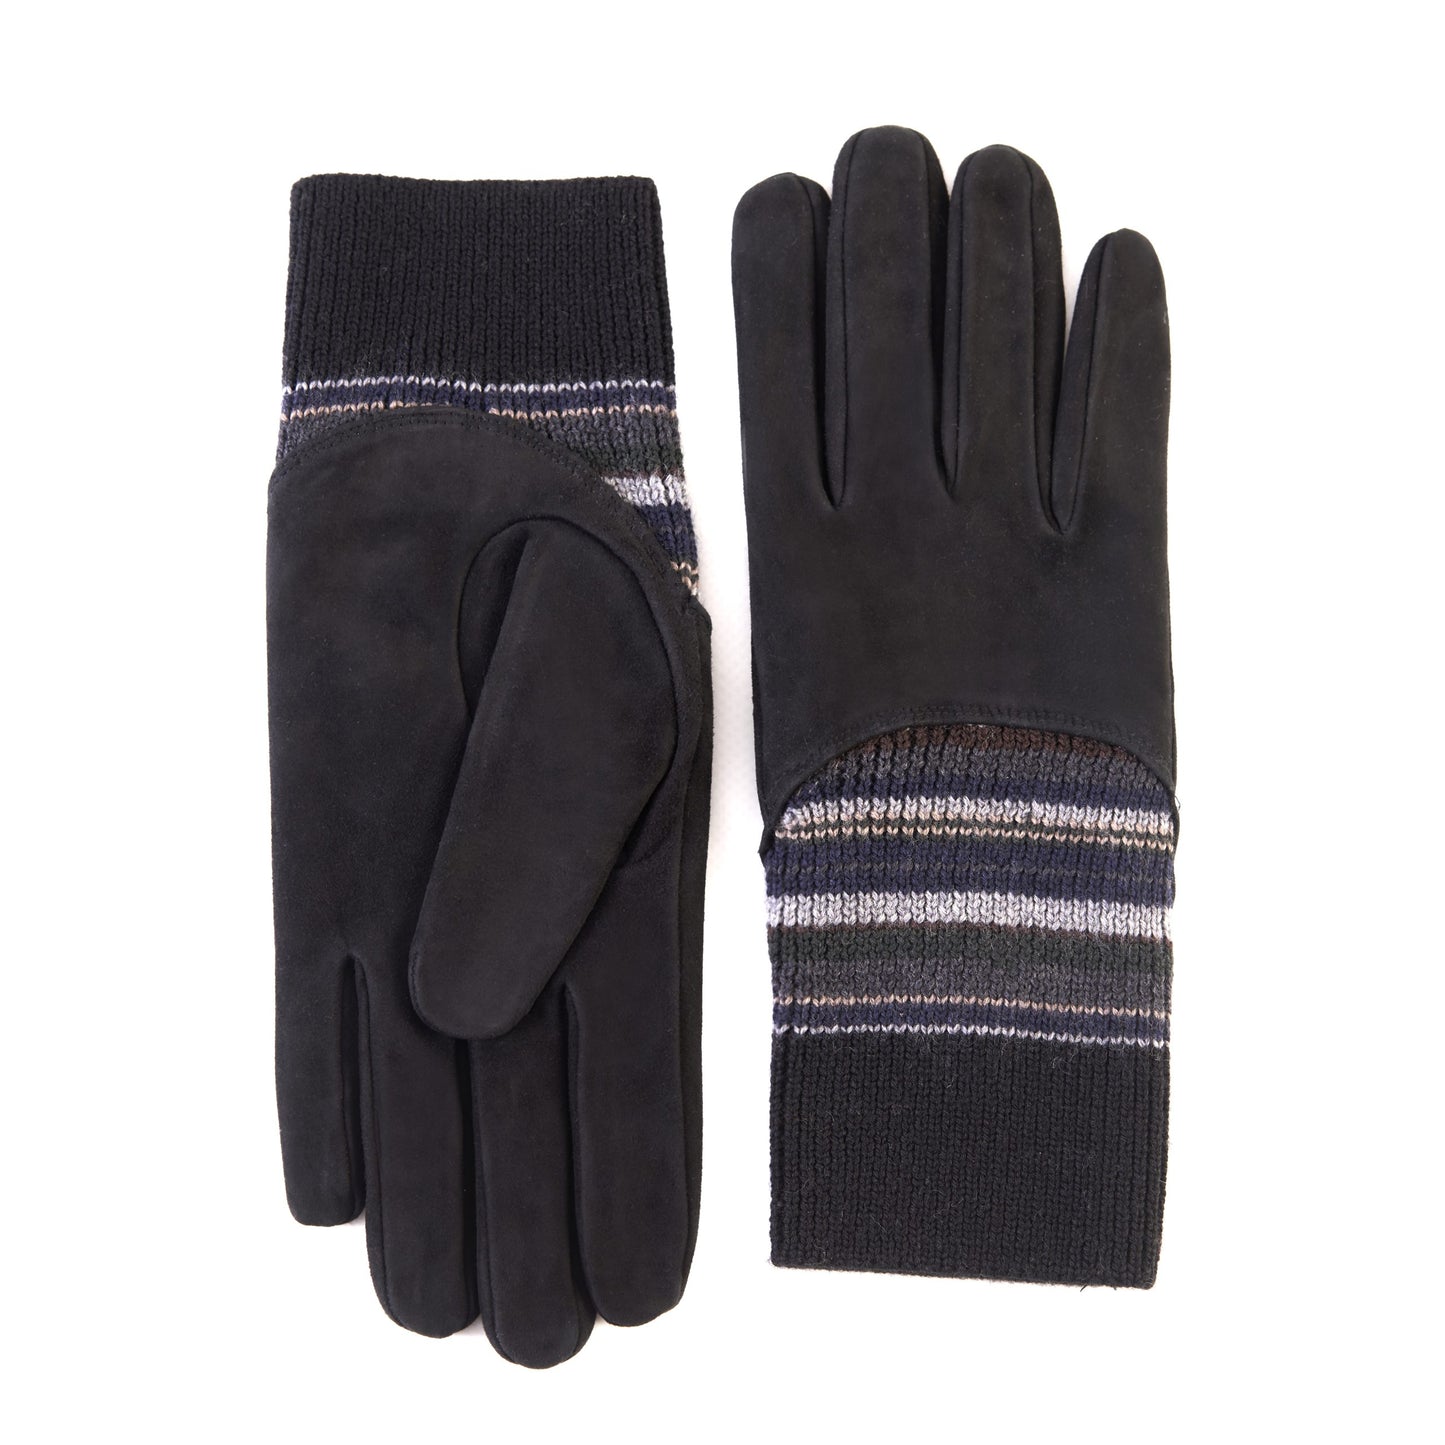 Men's black suede leather gloves with cashmere lining and wool cuff